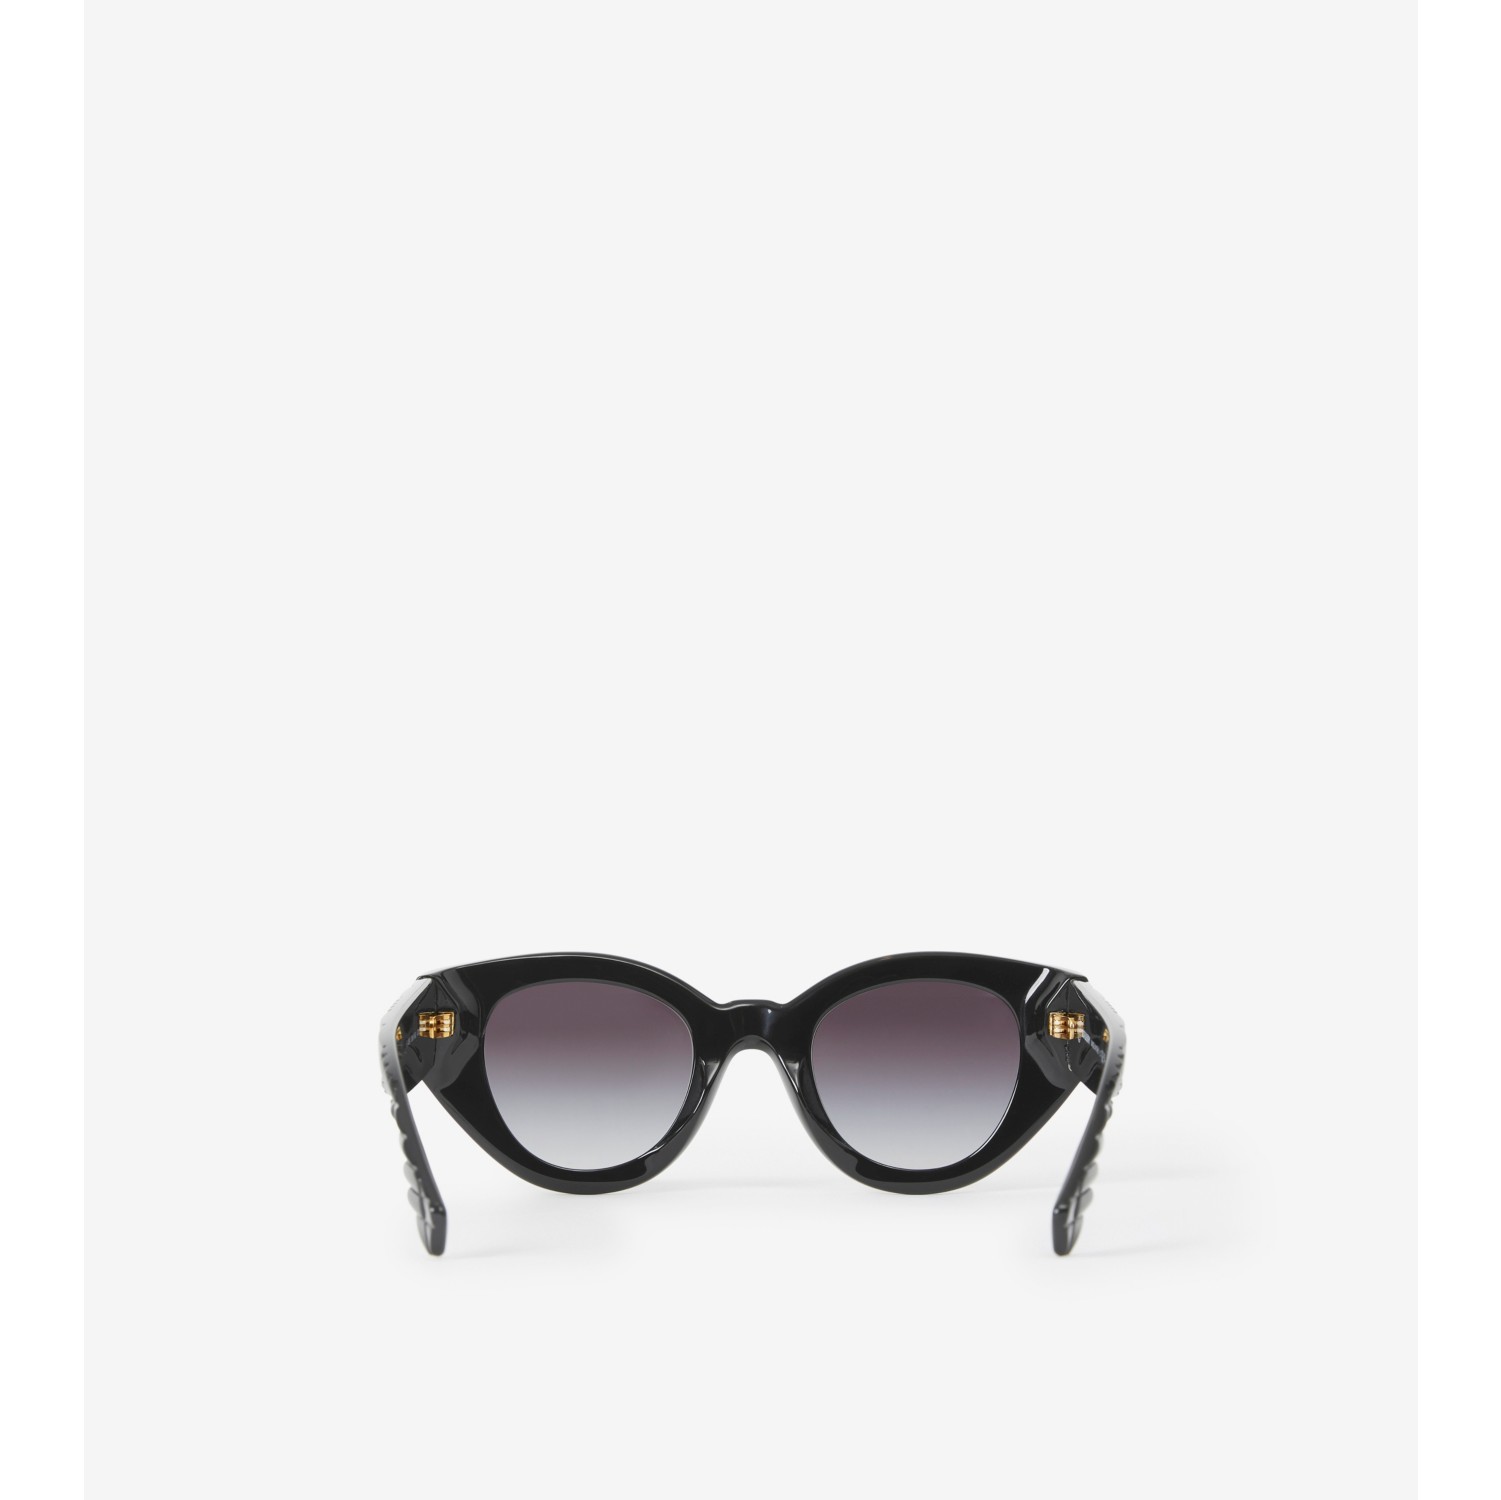 Gucci Women's Cat Eye Acetate Frames with Charm Sunglasses -  Black/Gold/Grey